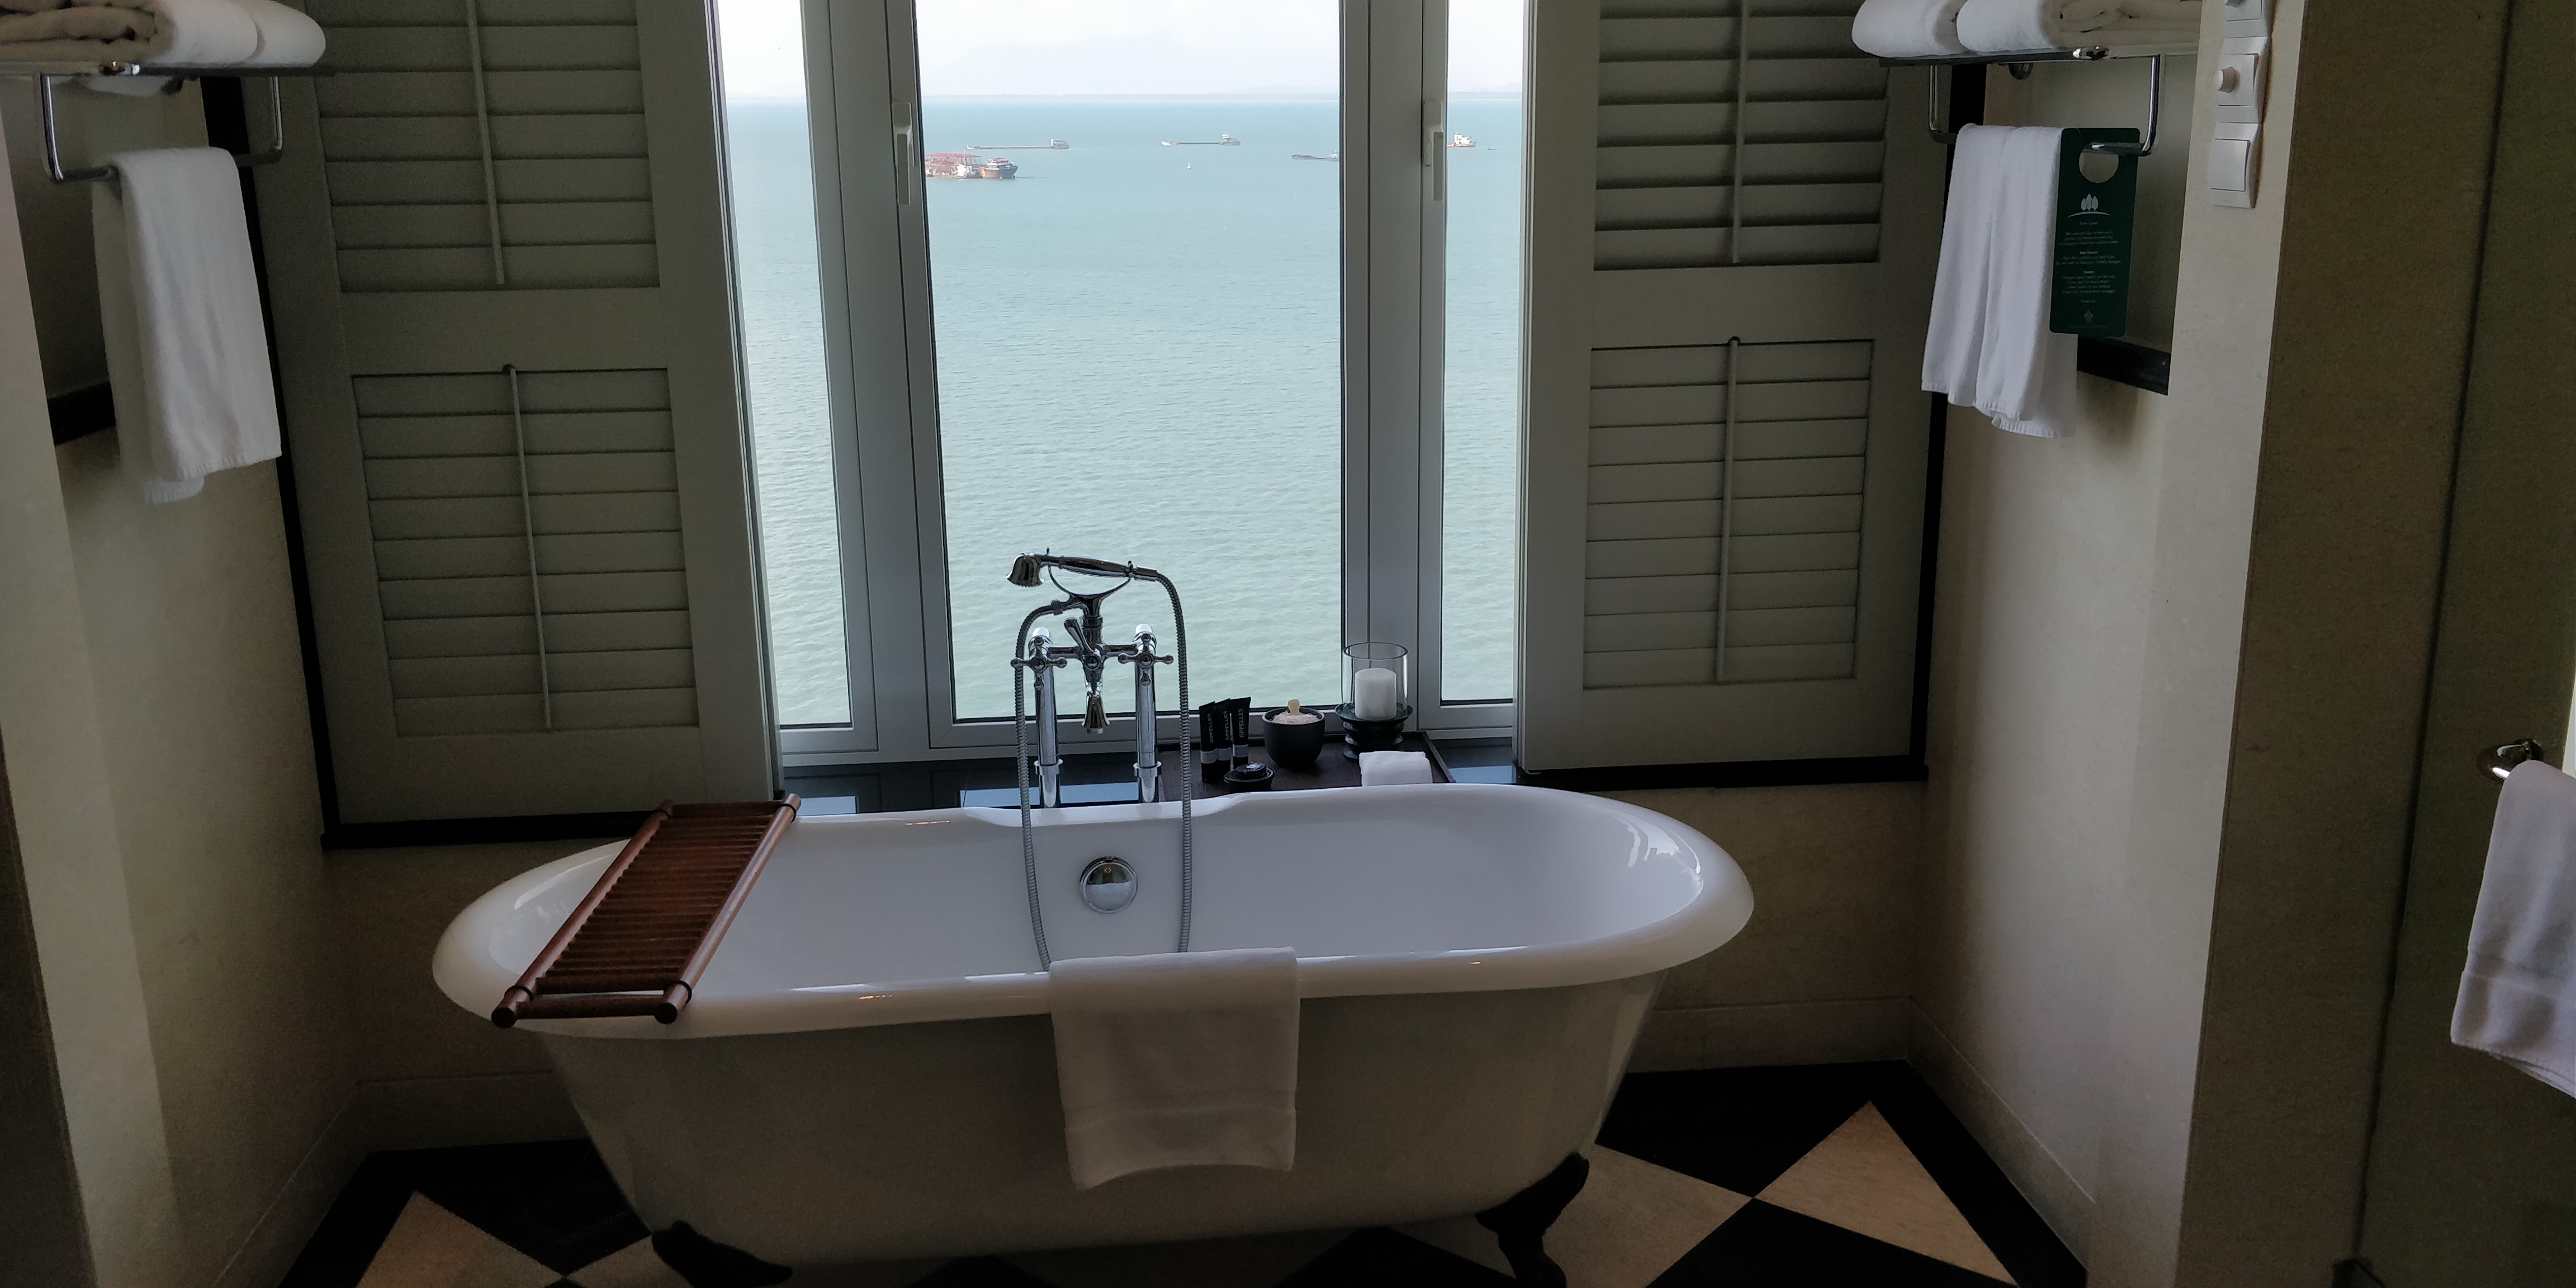 A PICTURE FO THE CLASSIC TUB WITH SEA VIEW